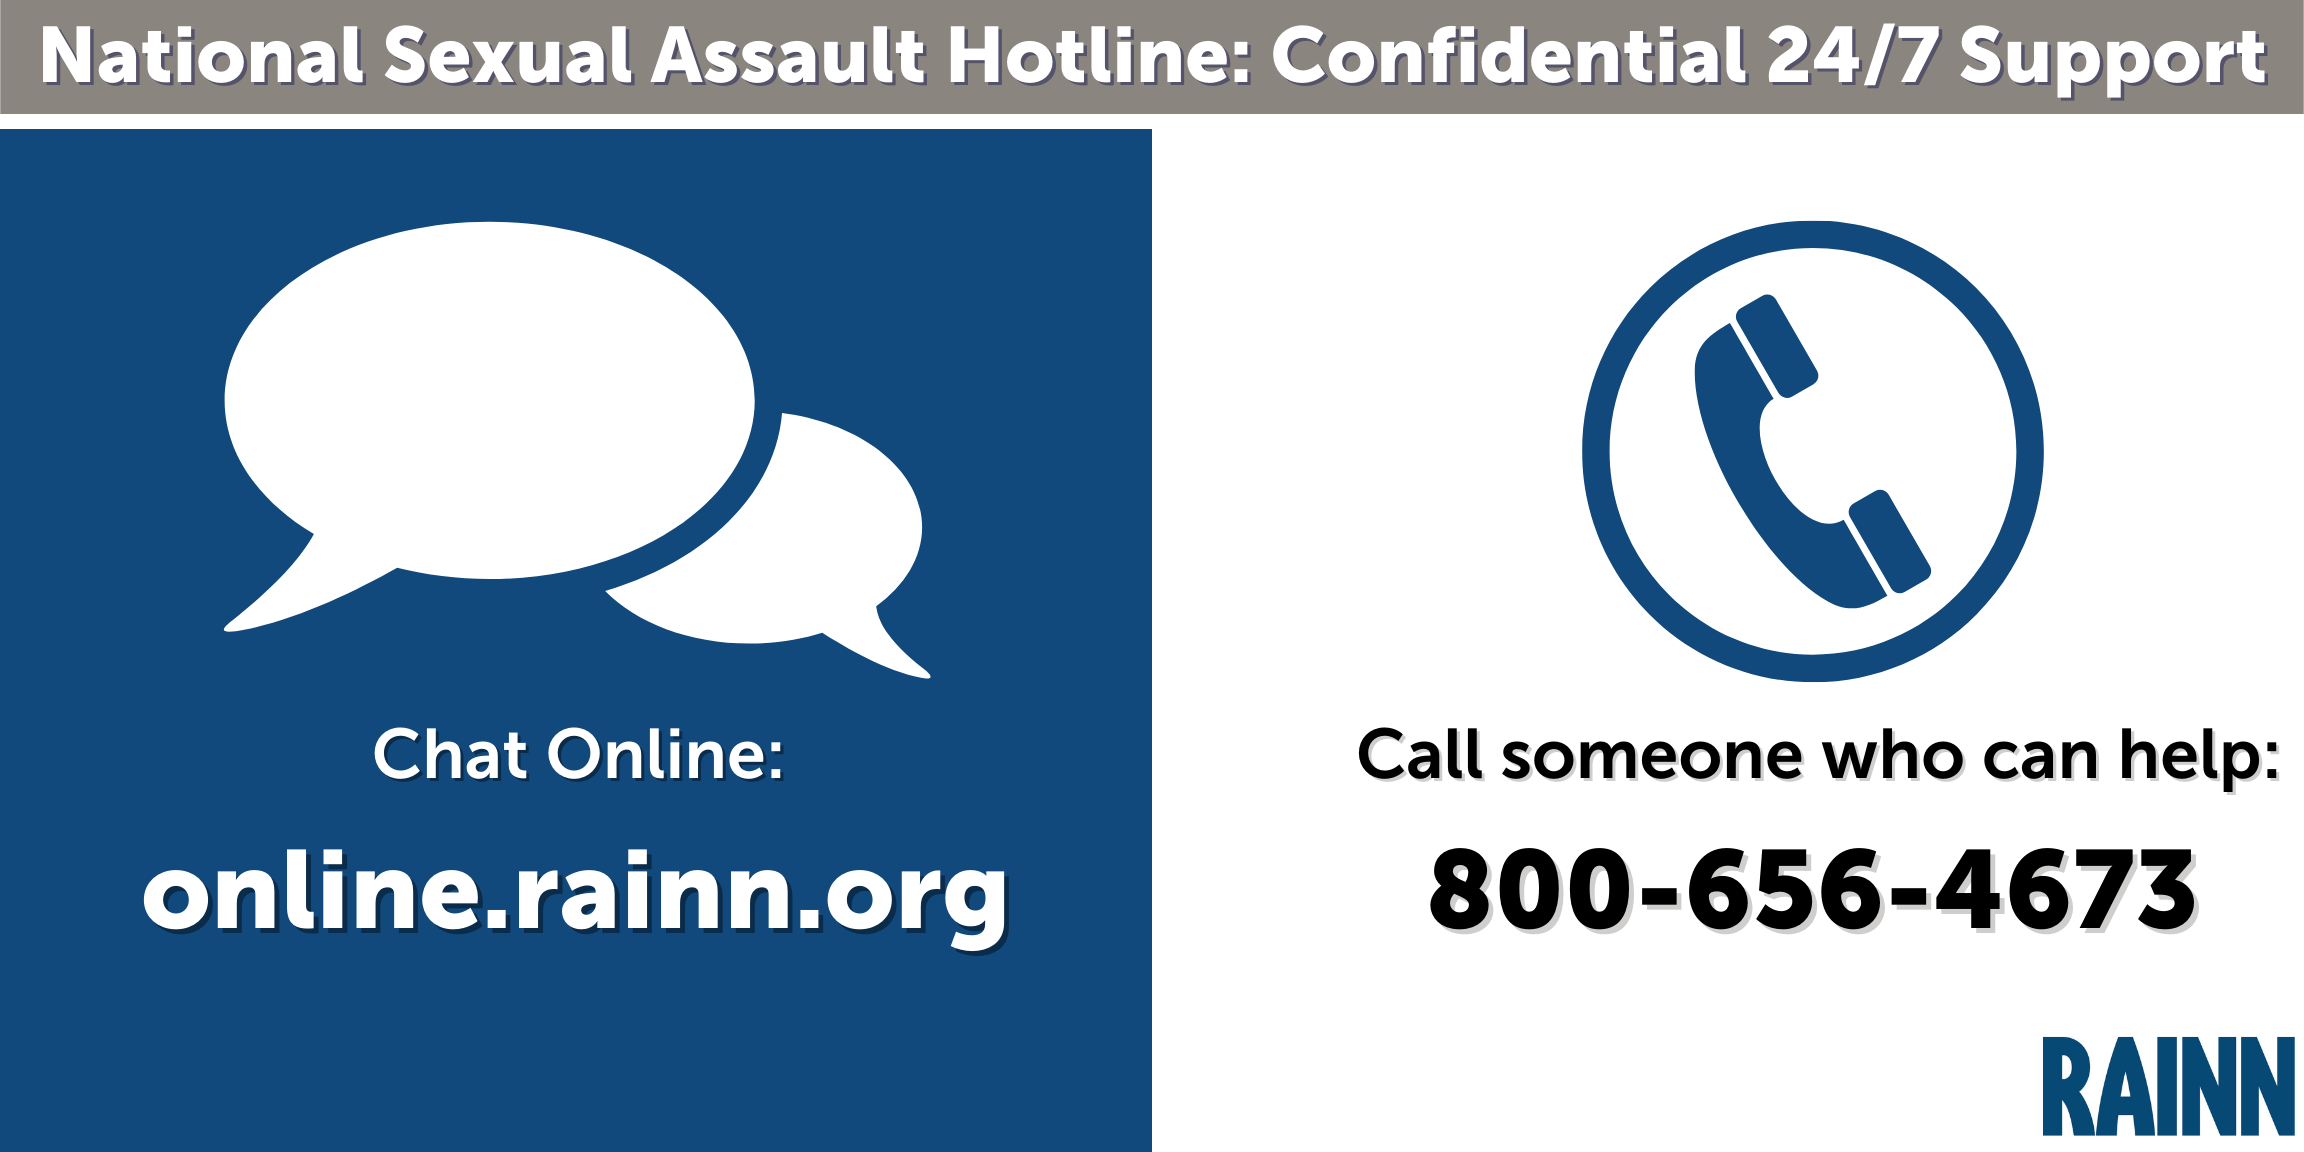 National Sexual Assault Hotline, Confidential 24/7 Support - Chat Online: online.rainn.org or 800-656-4673